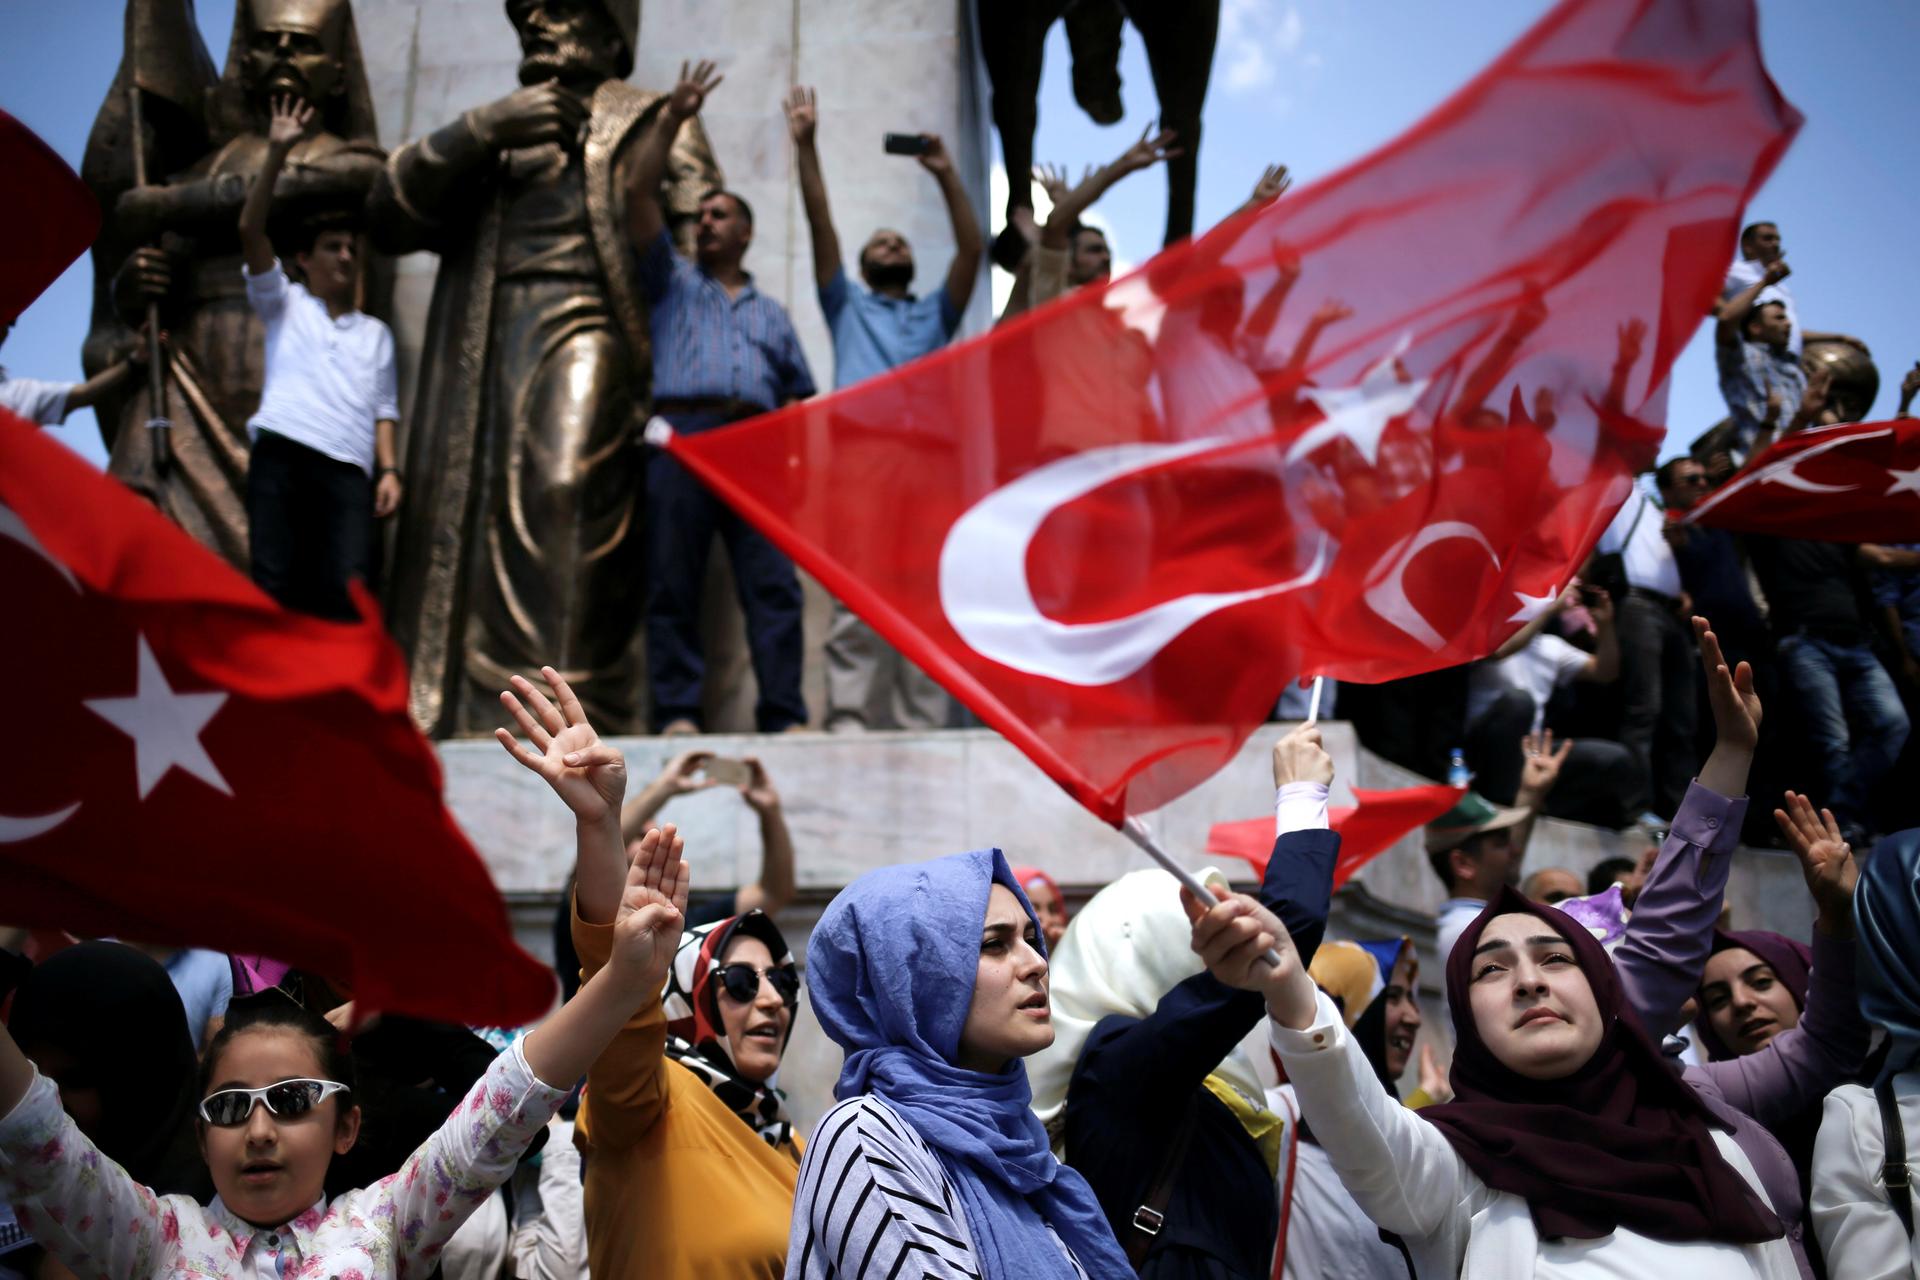 Supporters of Turkish President Tayyip Erdogan shout slogans and wave Turkish national flags during a pro-government demonstration in Sarachane park in Istanbul, Turkey, July 19, 2016.